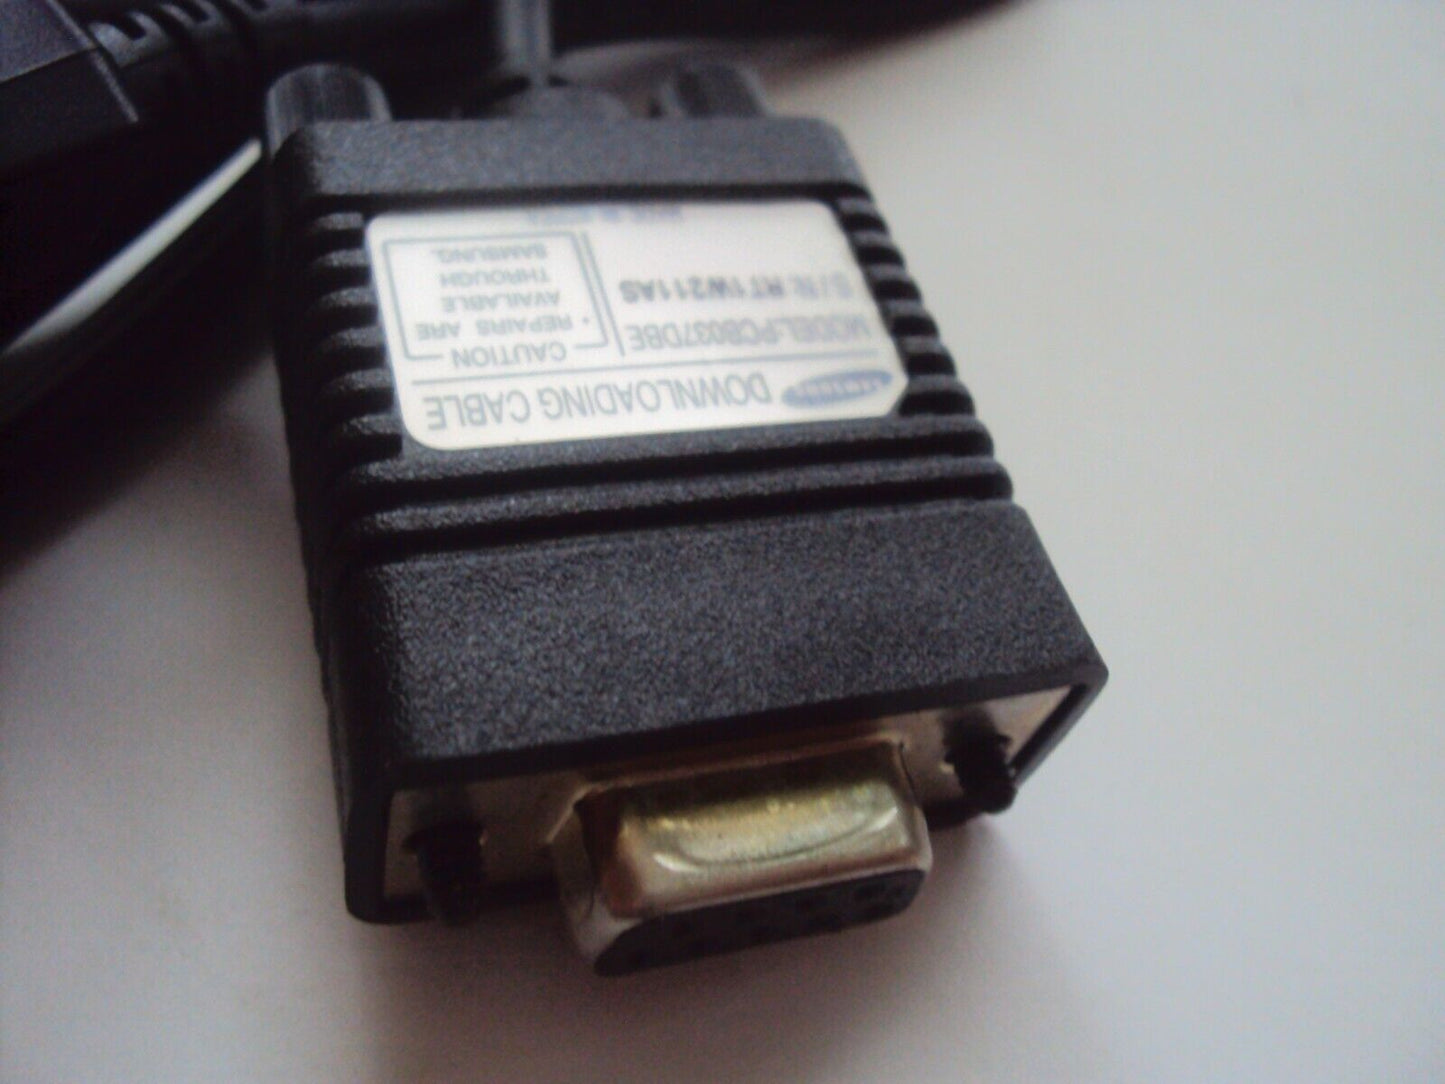 Samsung downloading cable model PCB037DBE genuine made in Korea